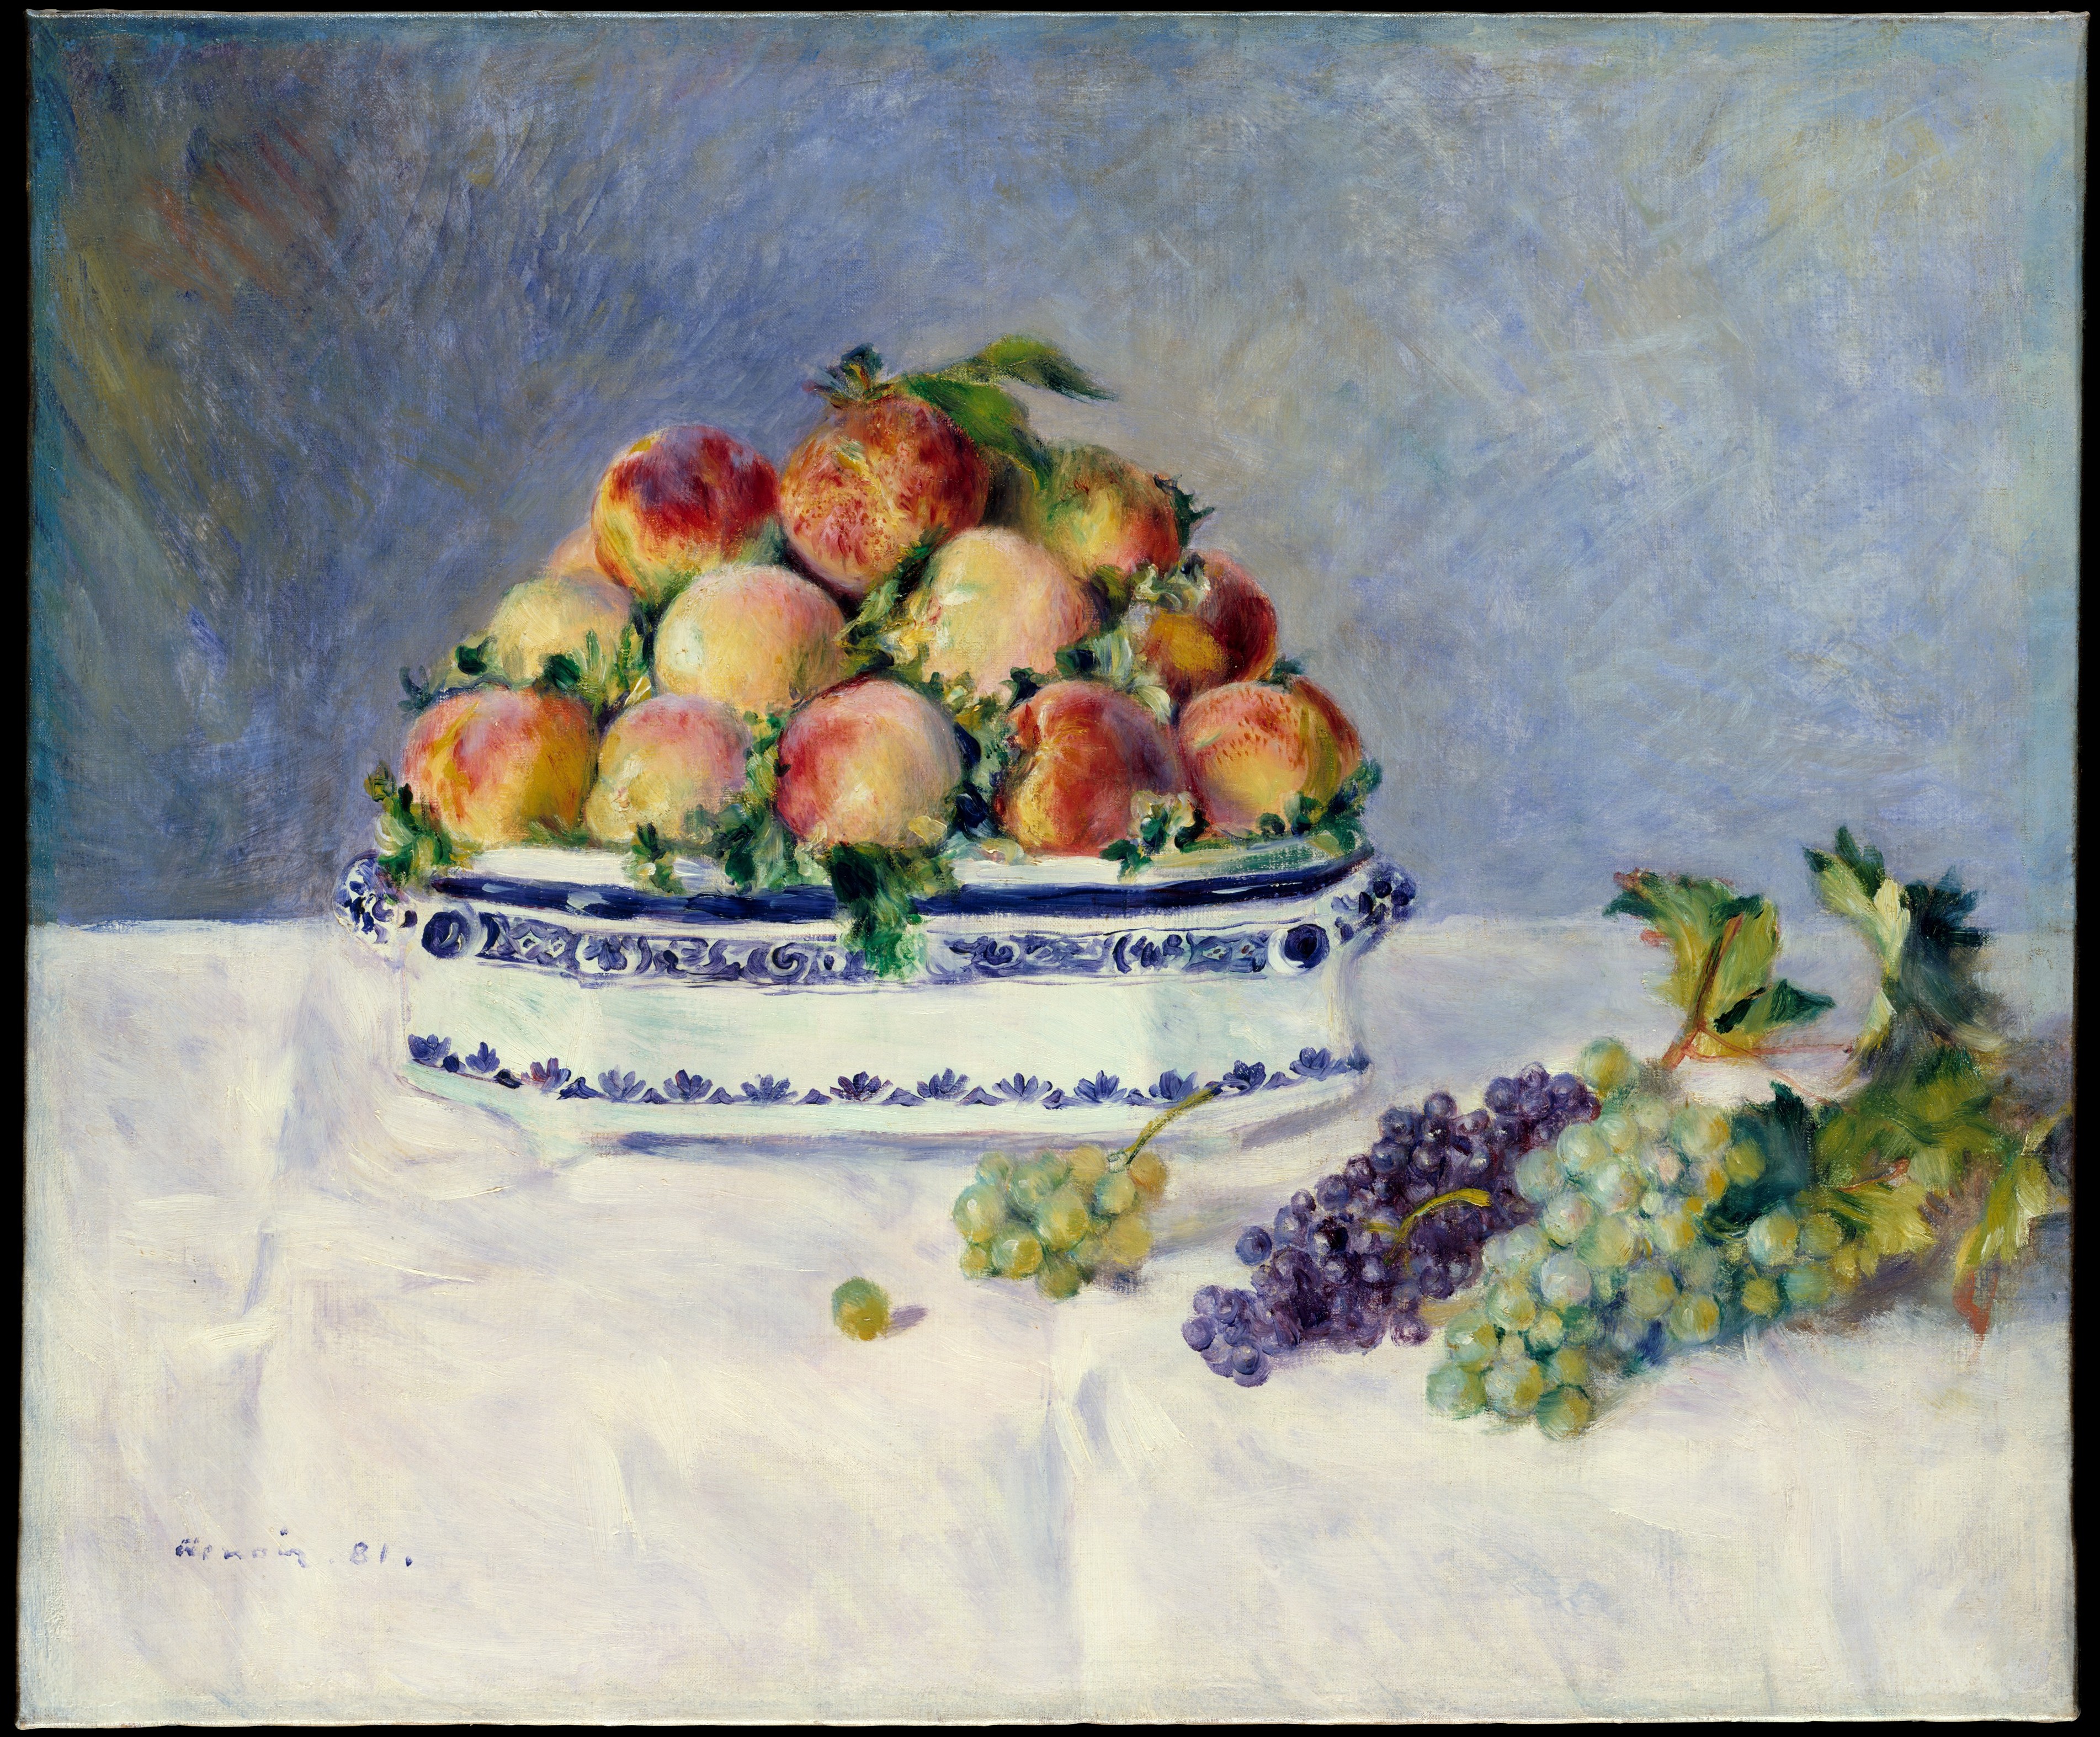 Still Life with Peaches and Grapes by Pierre-Auguste Renoir - 1881 - 53.3 x 64.8 cm Metropolitan Museum of Art